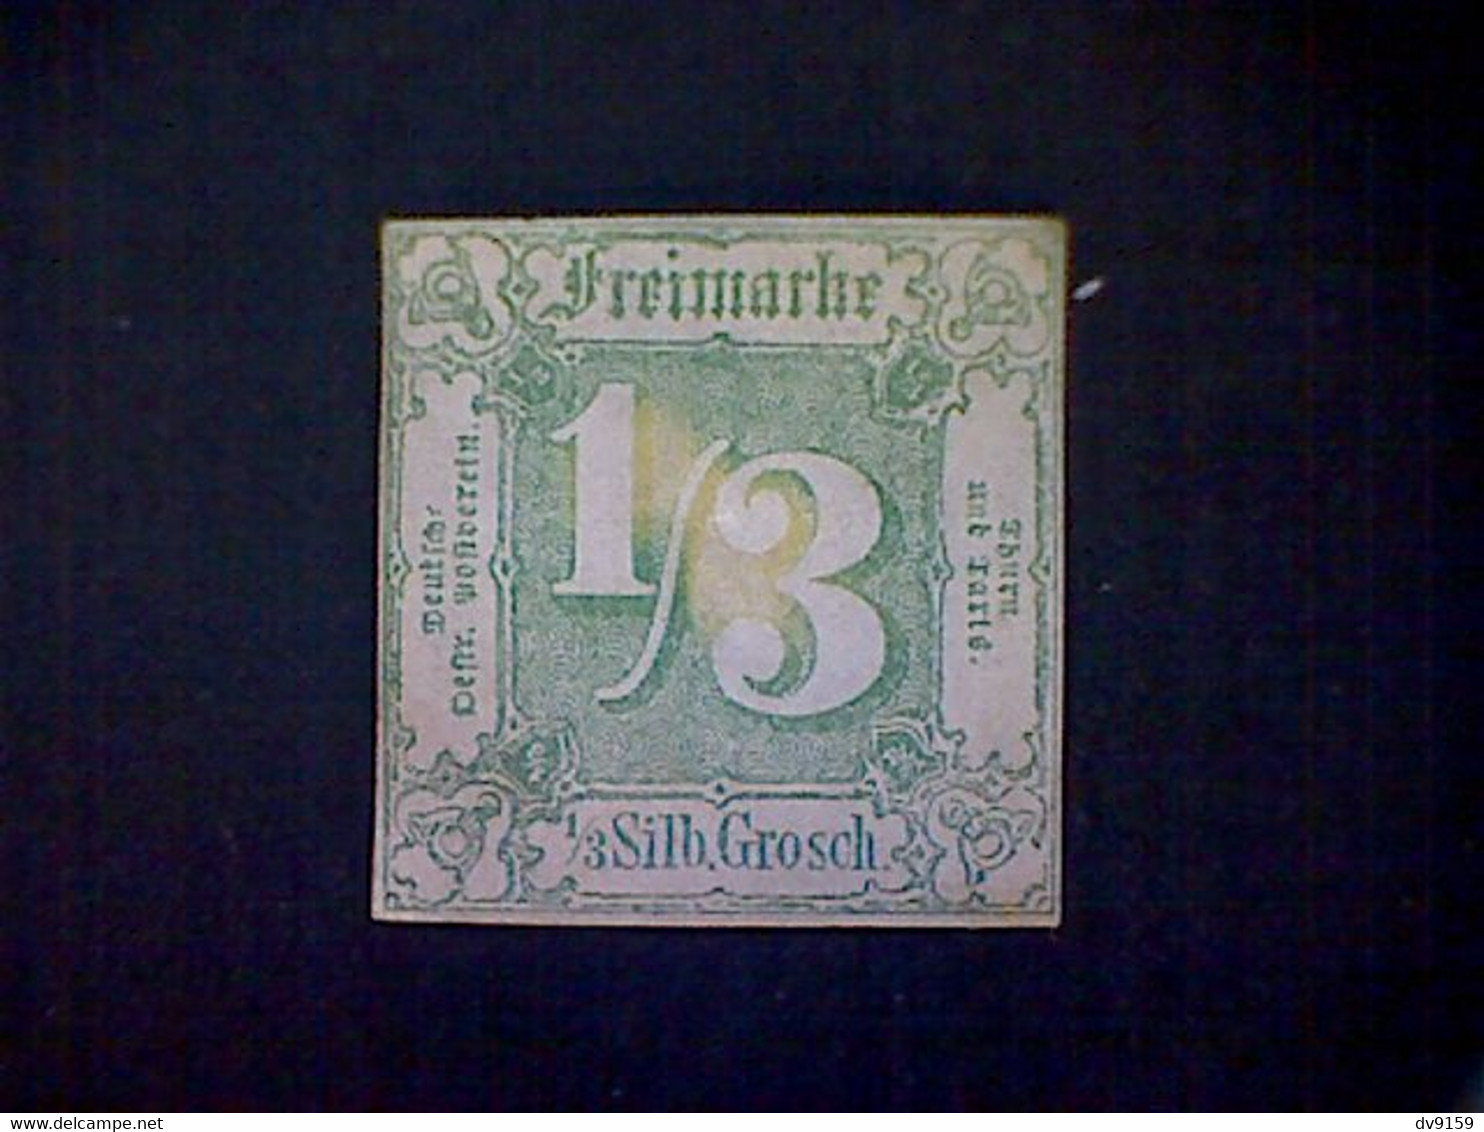 Germany (Thurn And Taxis), Scott #16, 1863, Mint (*), No Gum, 1/3 Sgr, Green - Postfris